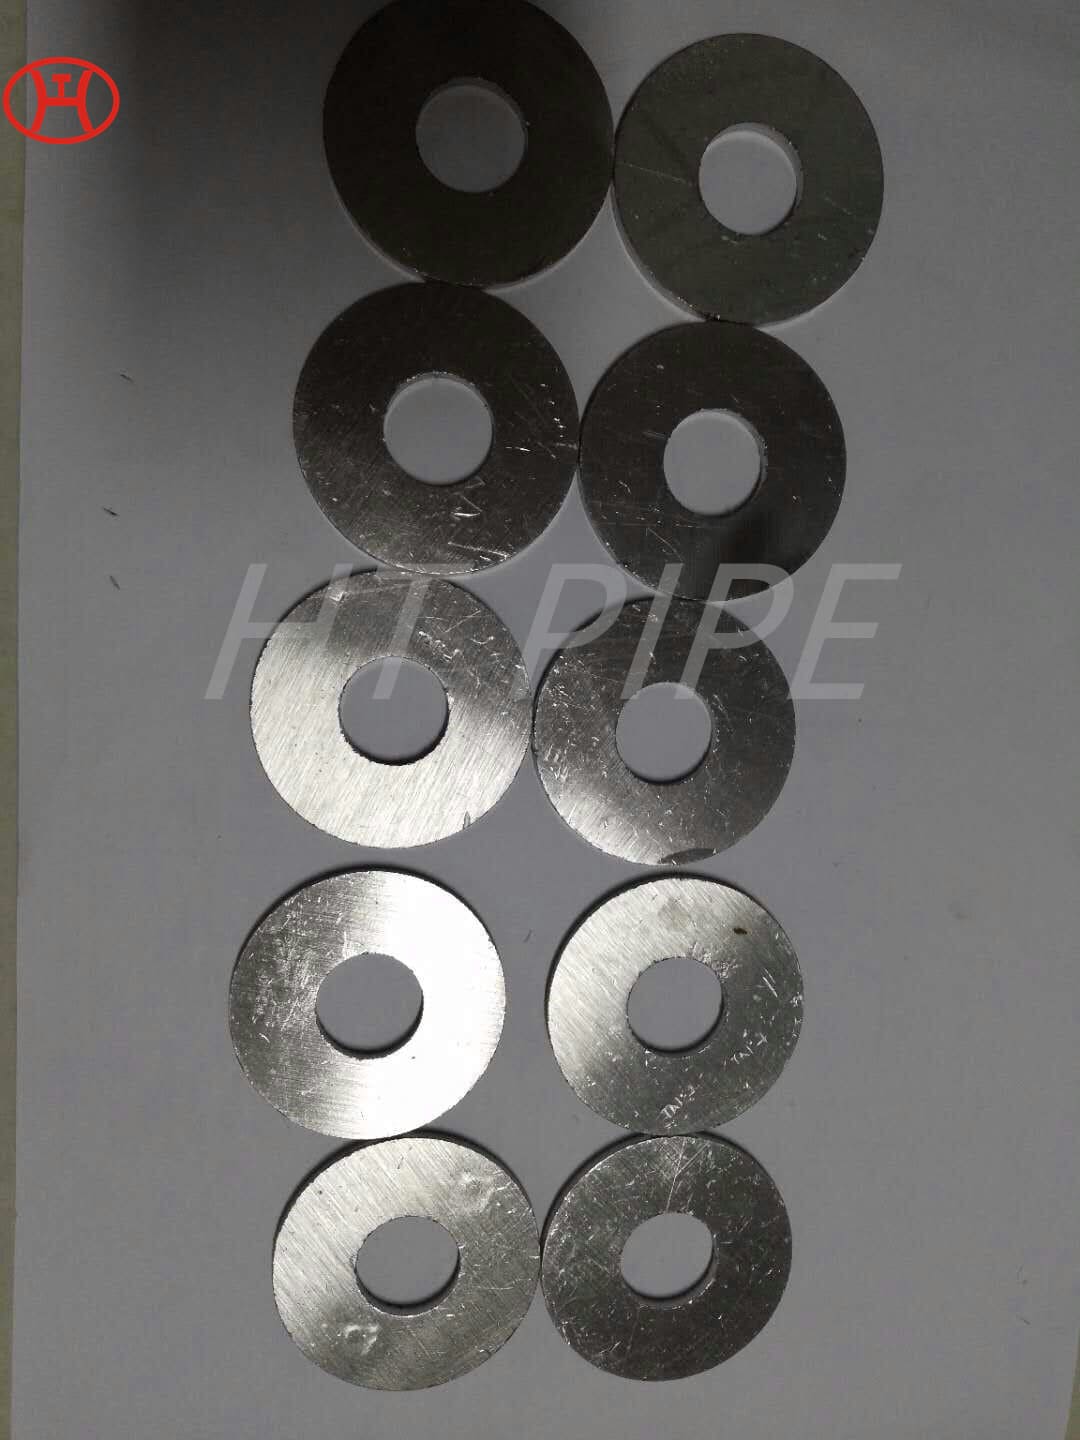 DIN127 904L-1.4539-N08904 Nature stainless steel 2.5 mm washers stainless steel washer fastener